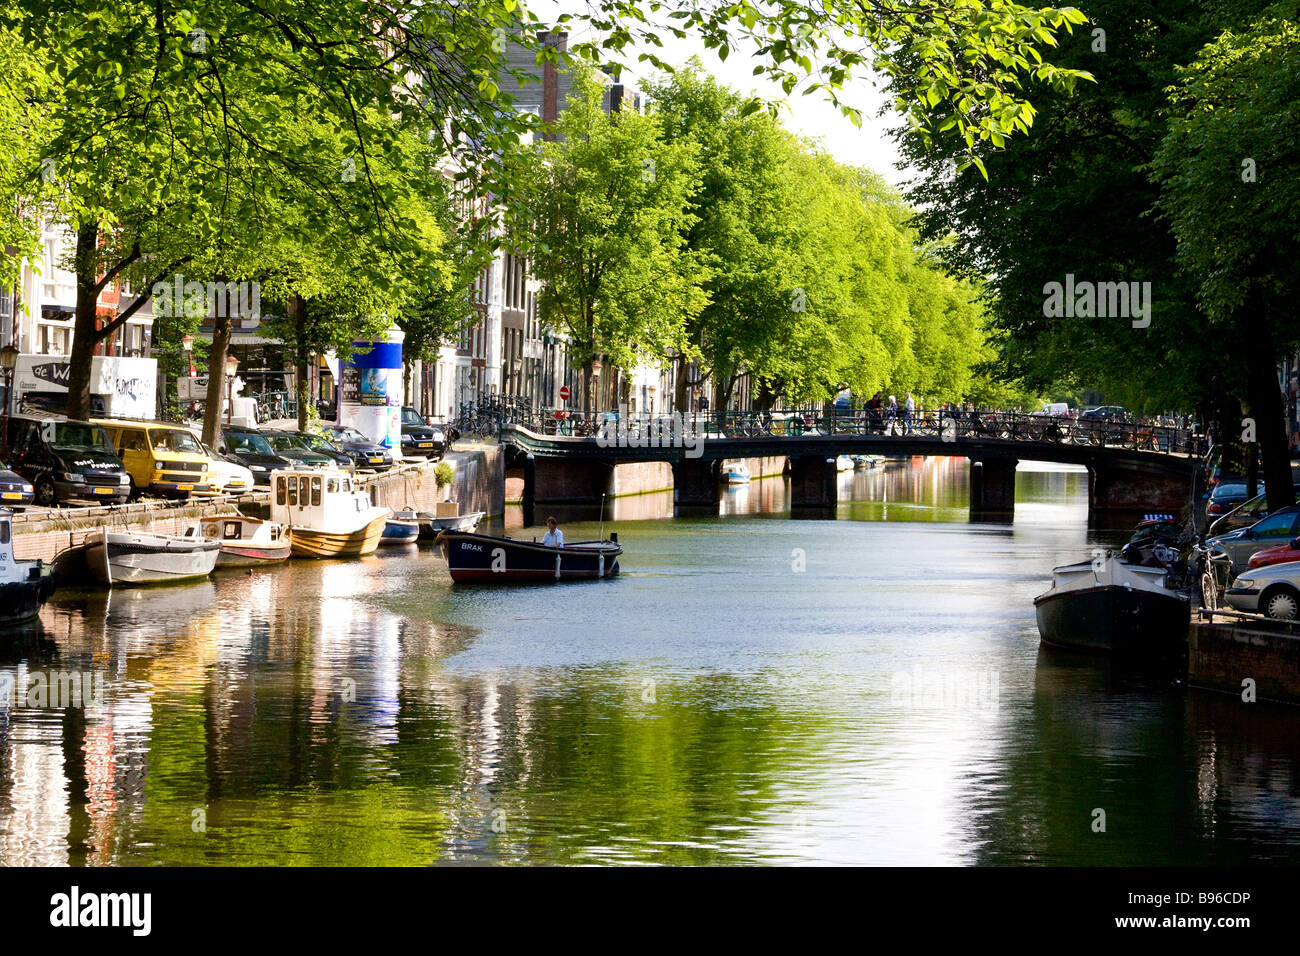 singel canal with barges, boats and bridge Stock Photo